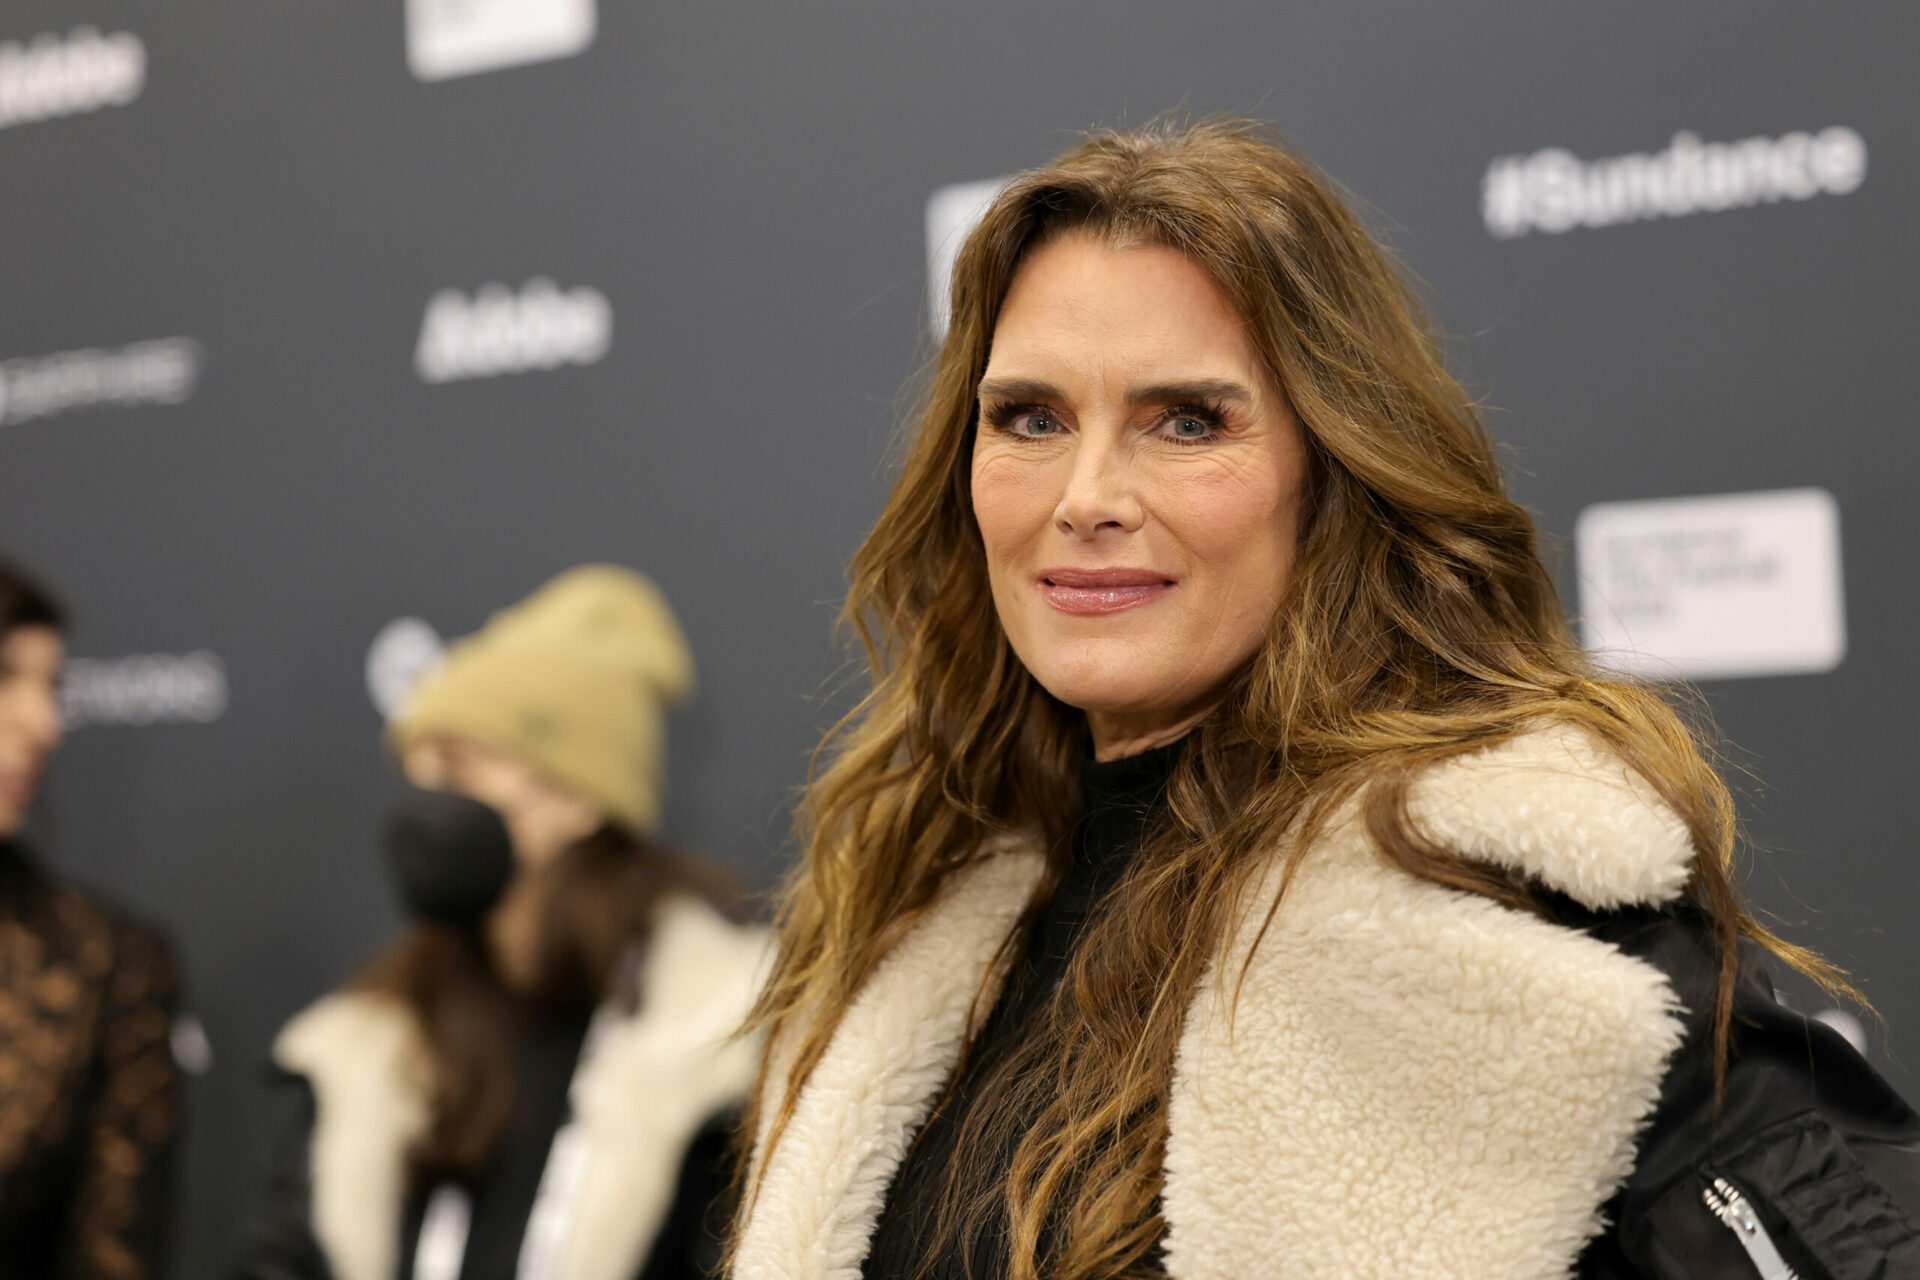 Brooke Shields had a grand mal seizure. Bradley Cooper was by her side as it went down